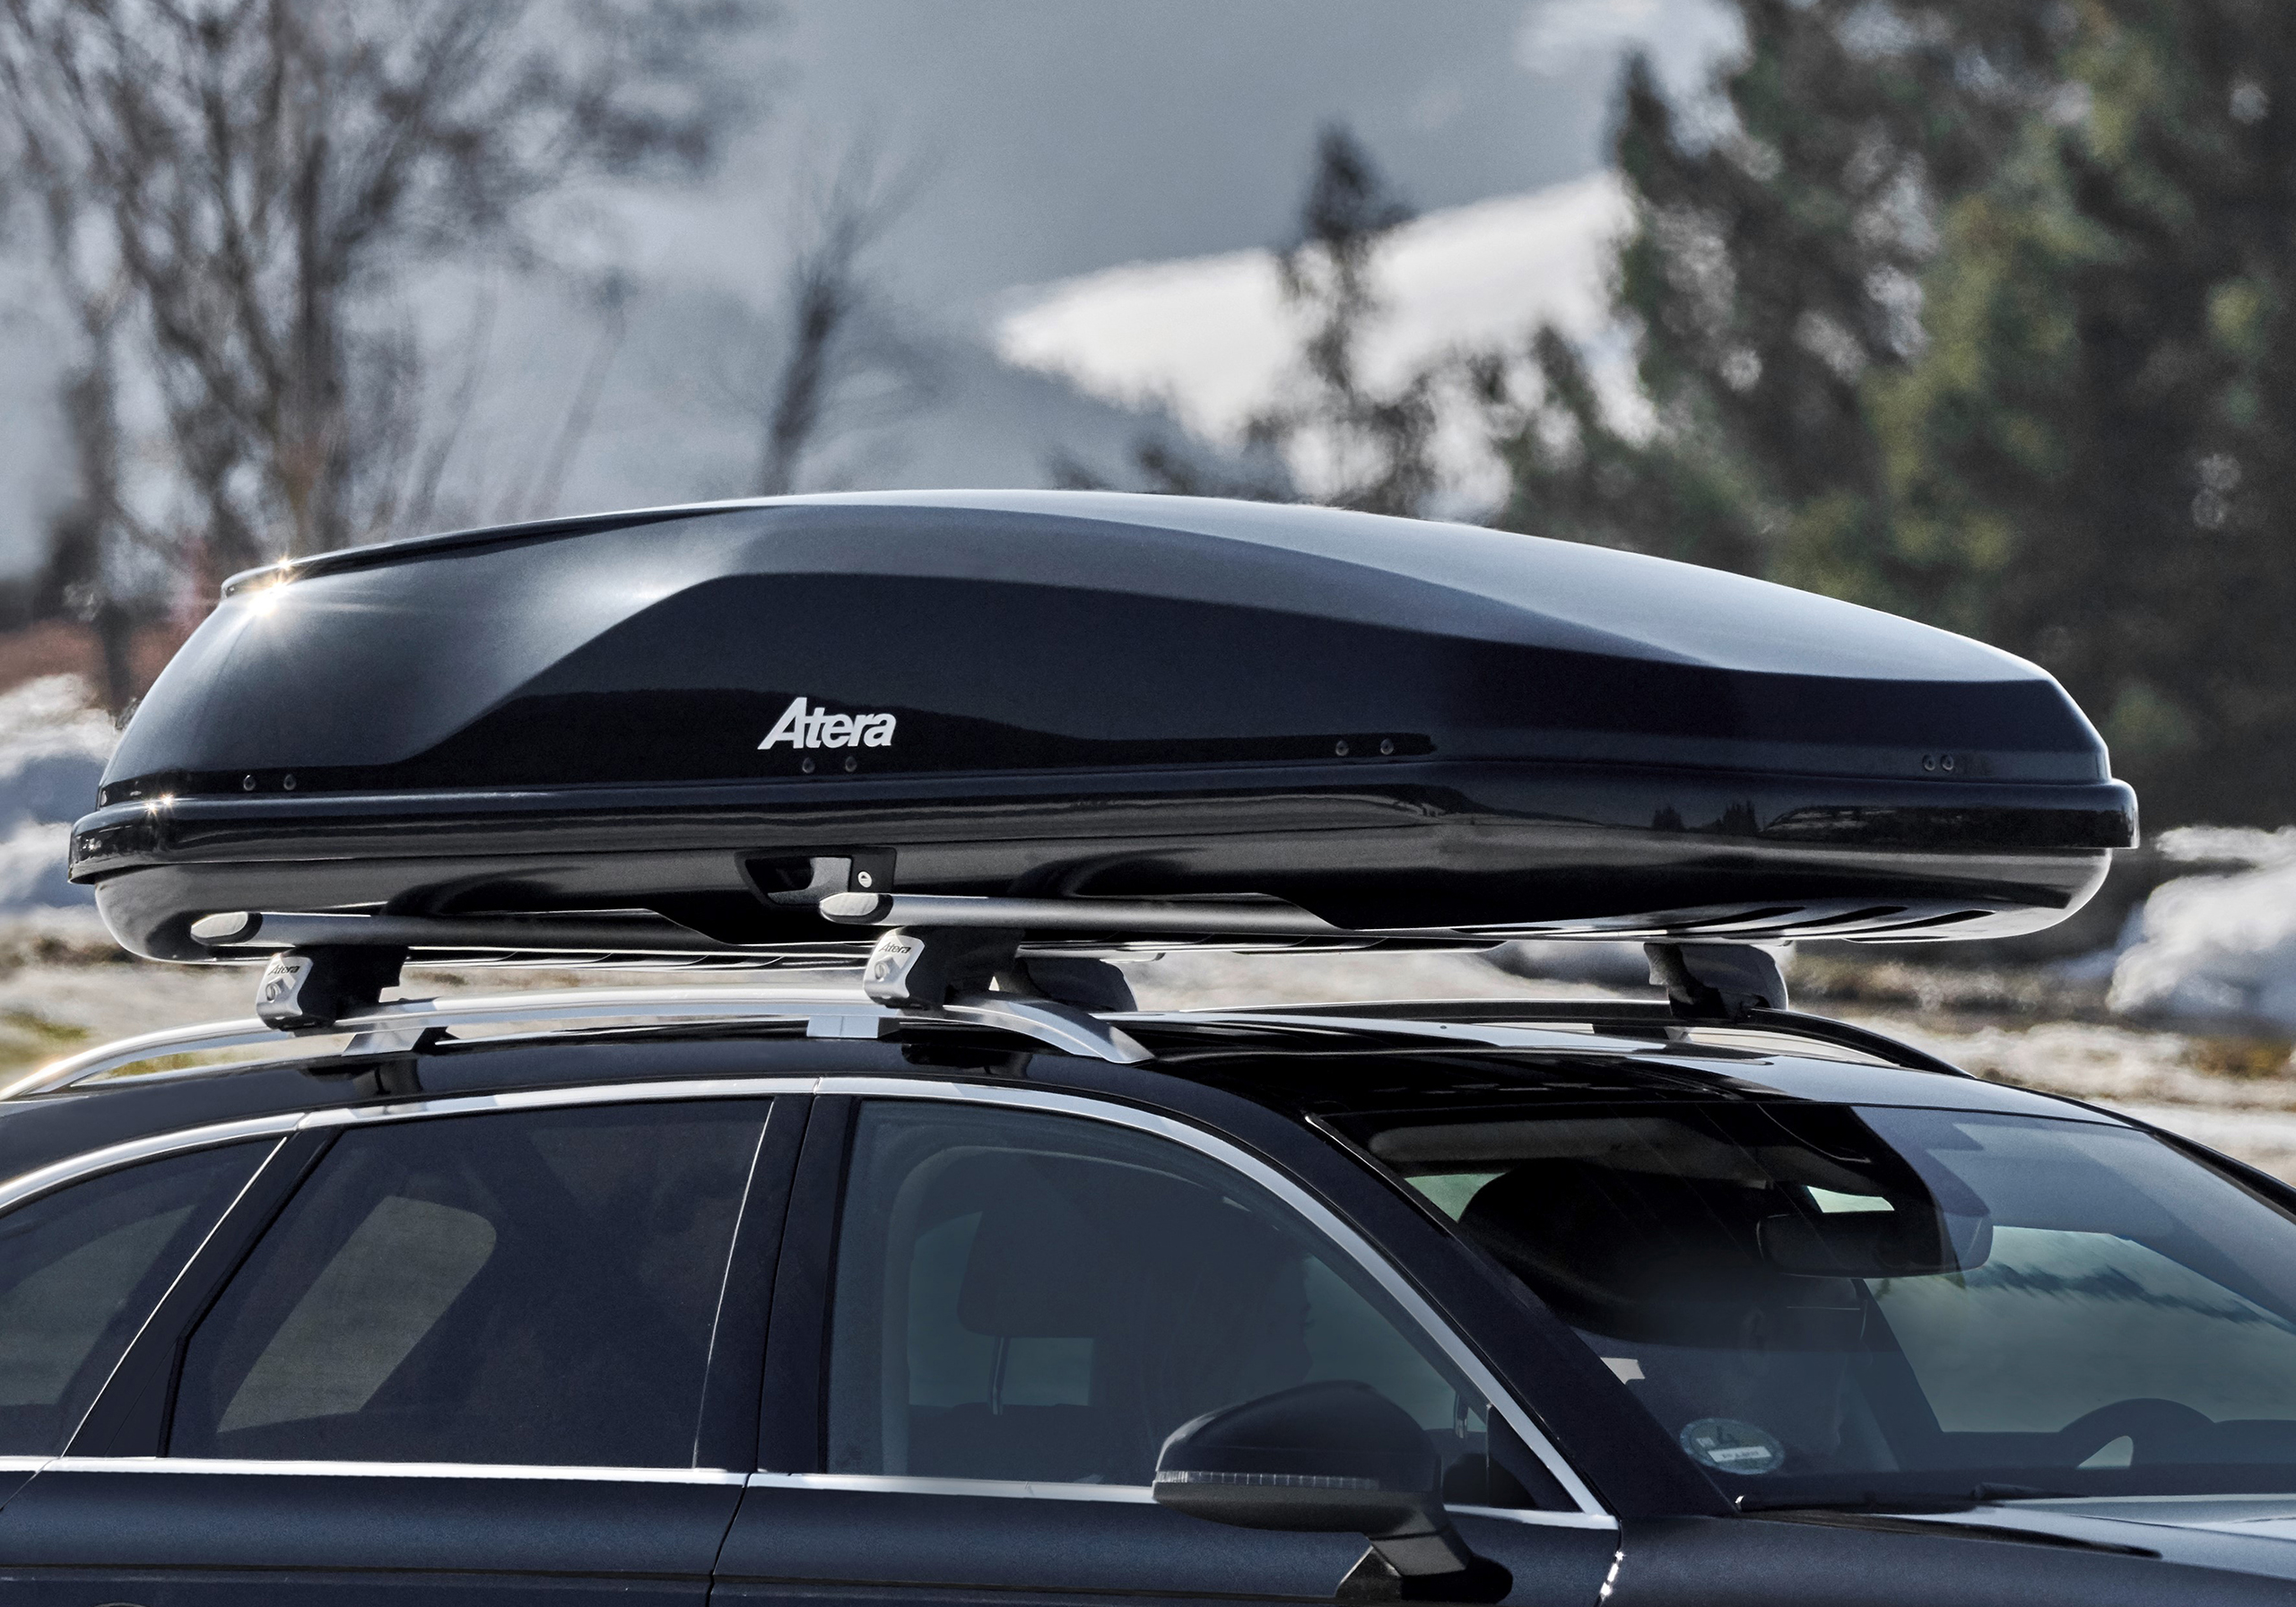 Package deal: Atera Casar L AR2292 roof box, gloss black, and bars